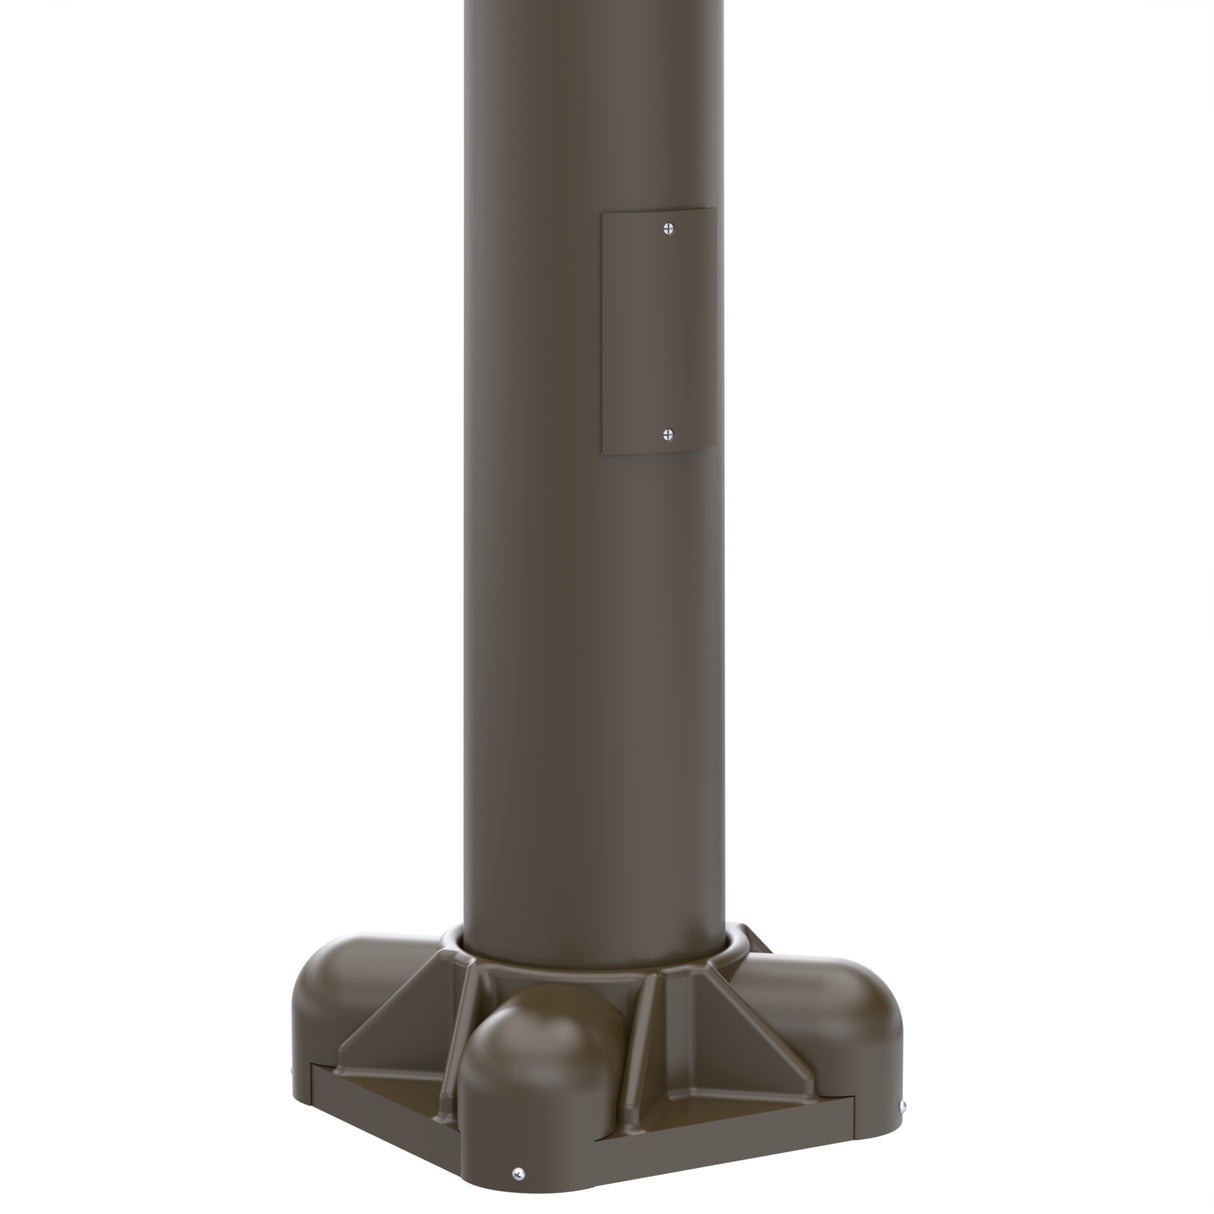 23' Tall x 8.0" Base OD x 4.5" Top OD x 0.188" Thick, Round Tapered Aluminum, Anchor Base Light Pole